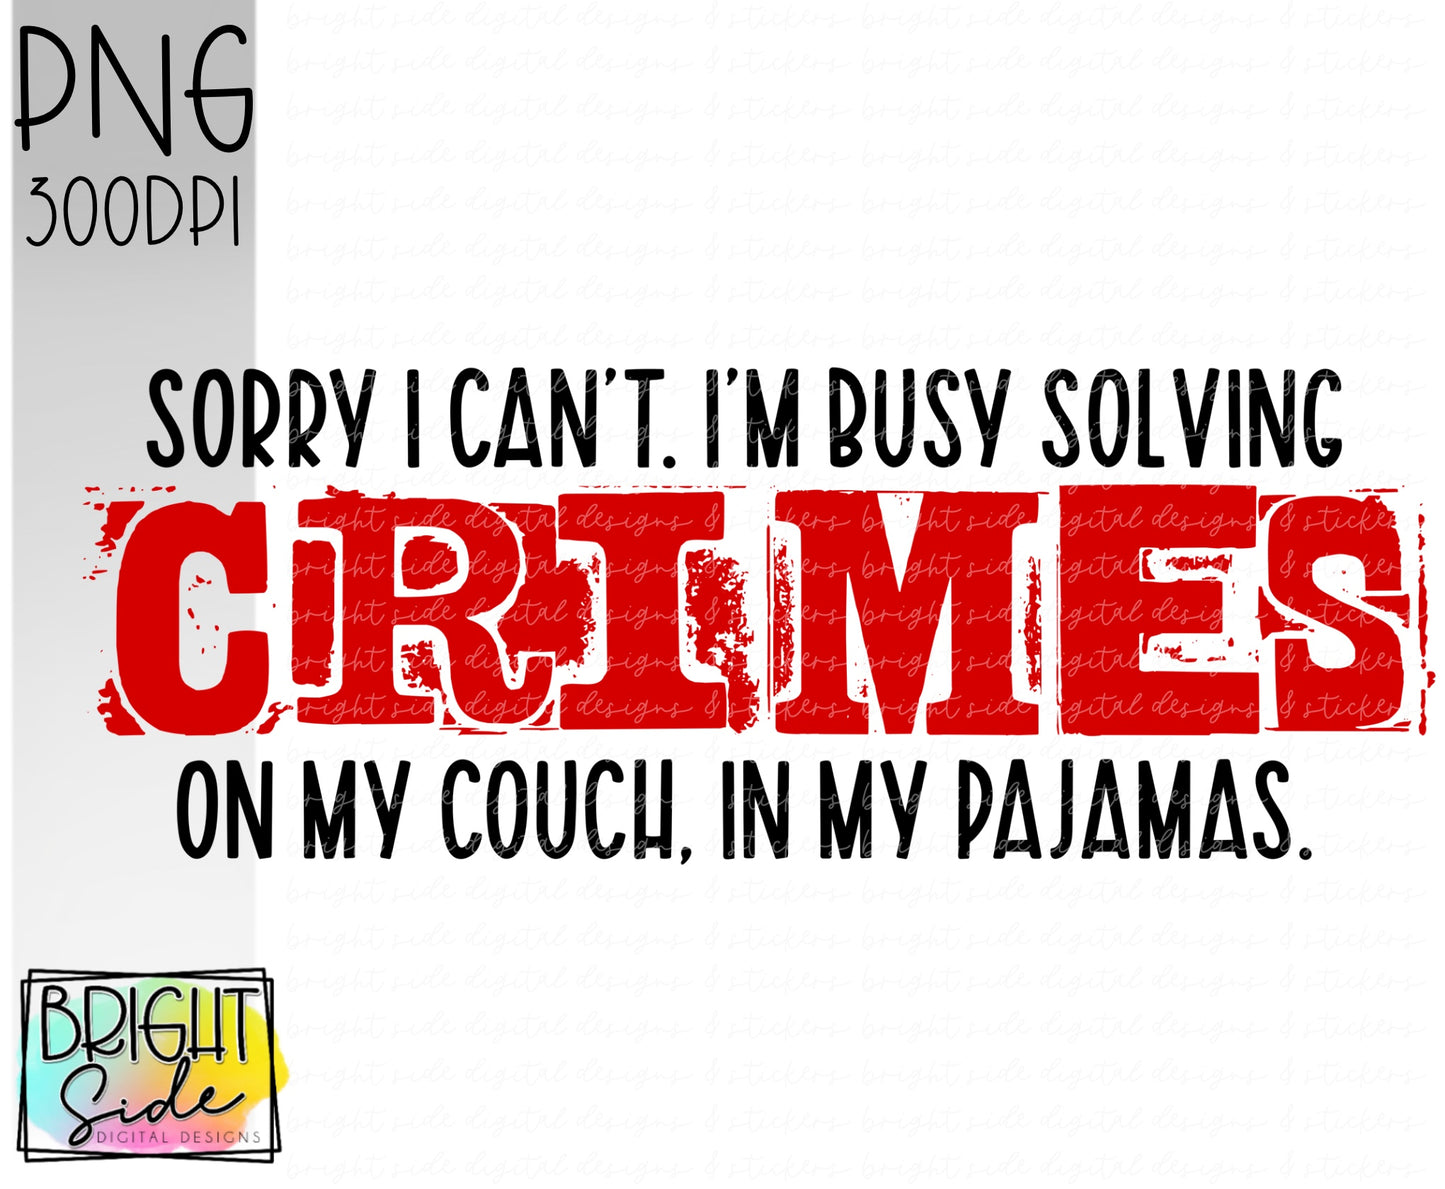 I can’t I’m busy solving crime. On my couch, in my pajamas.